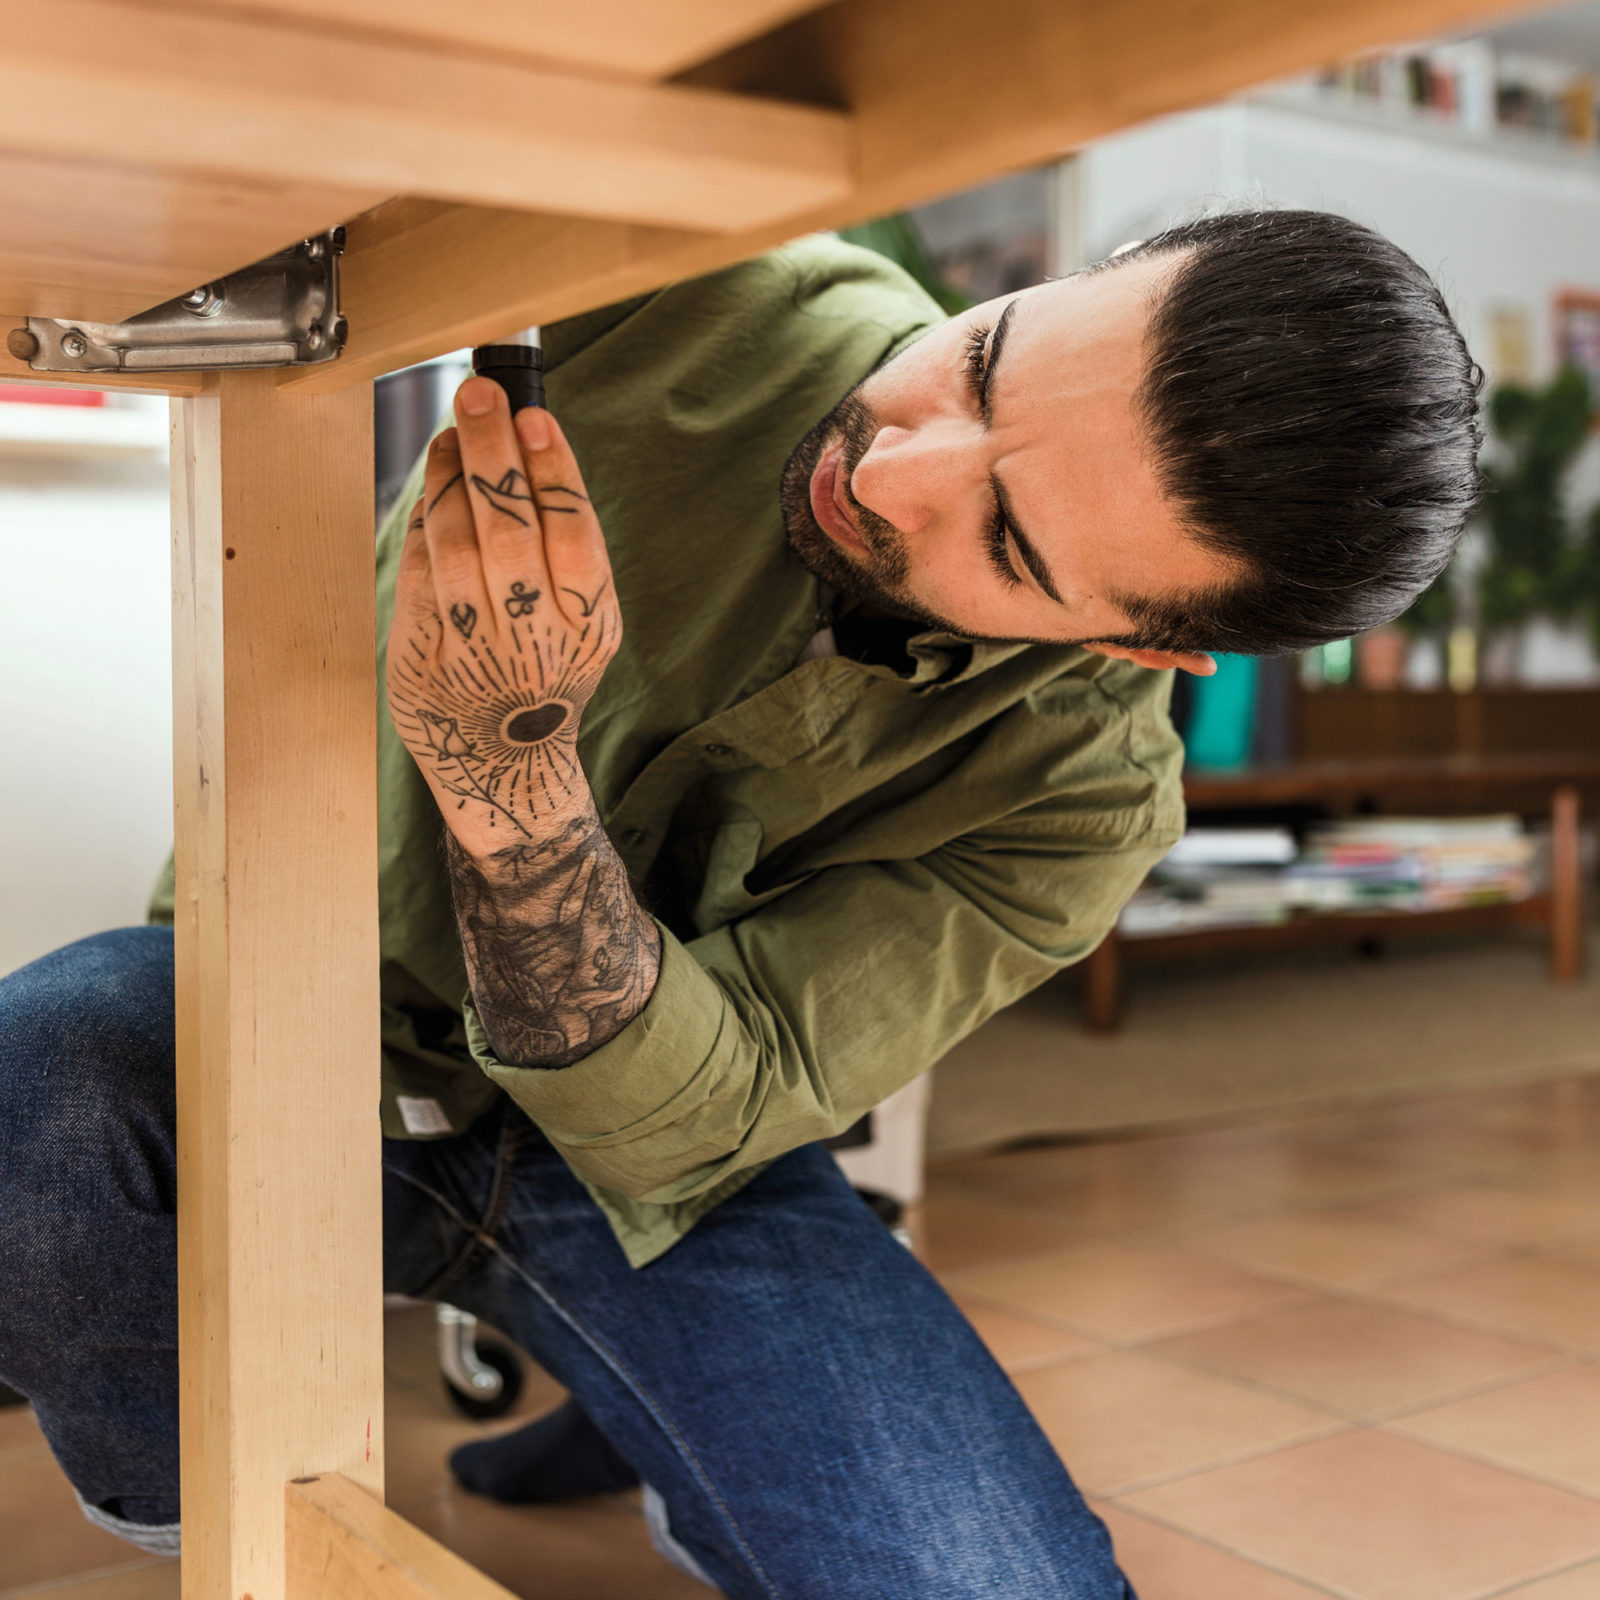 Young dark-haired man with beard and tattoos, wearing jeans and a green shirt, squats while assembling a table.